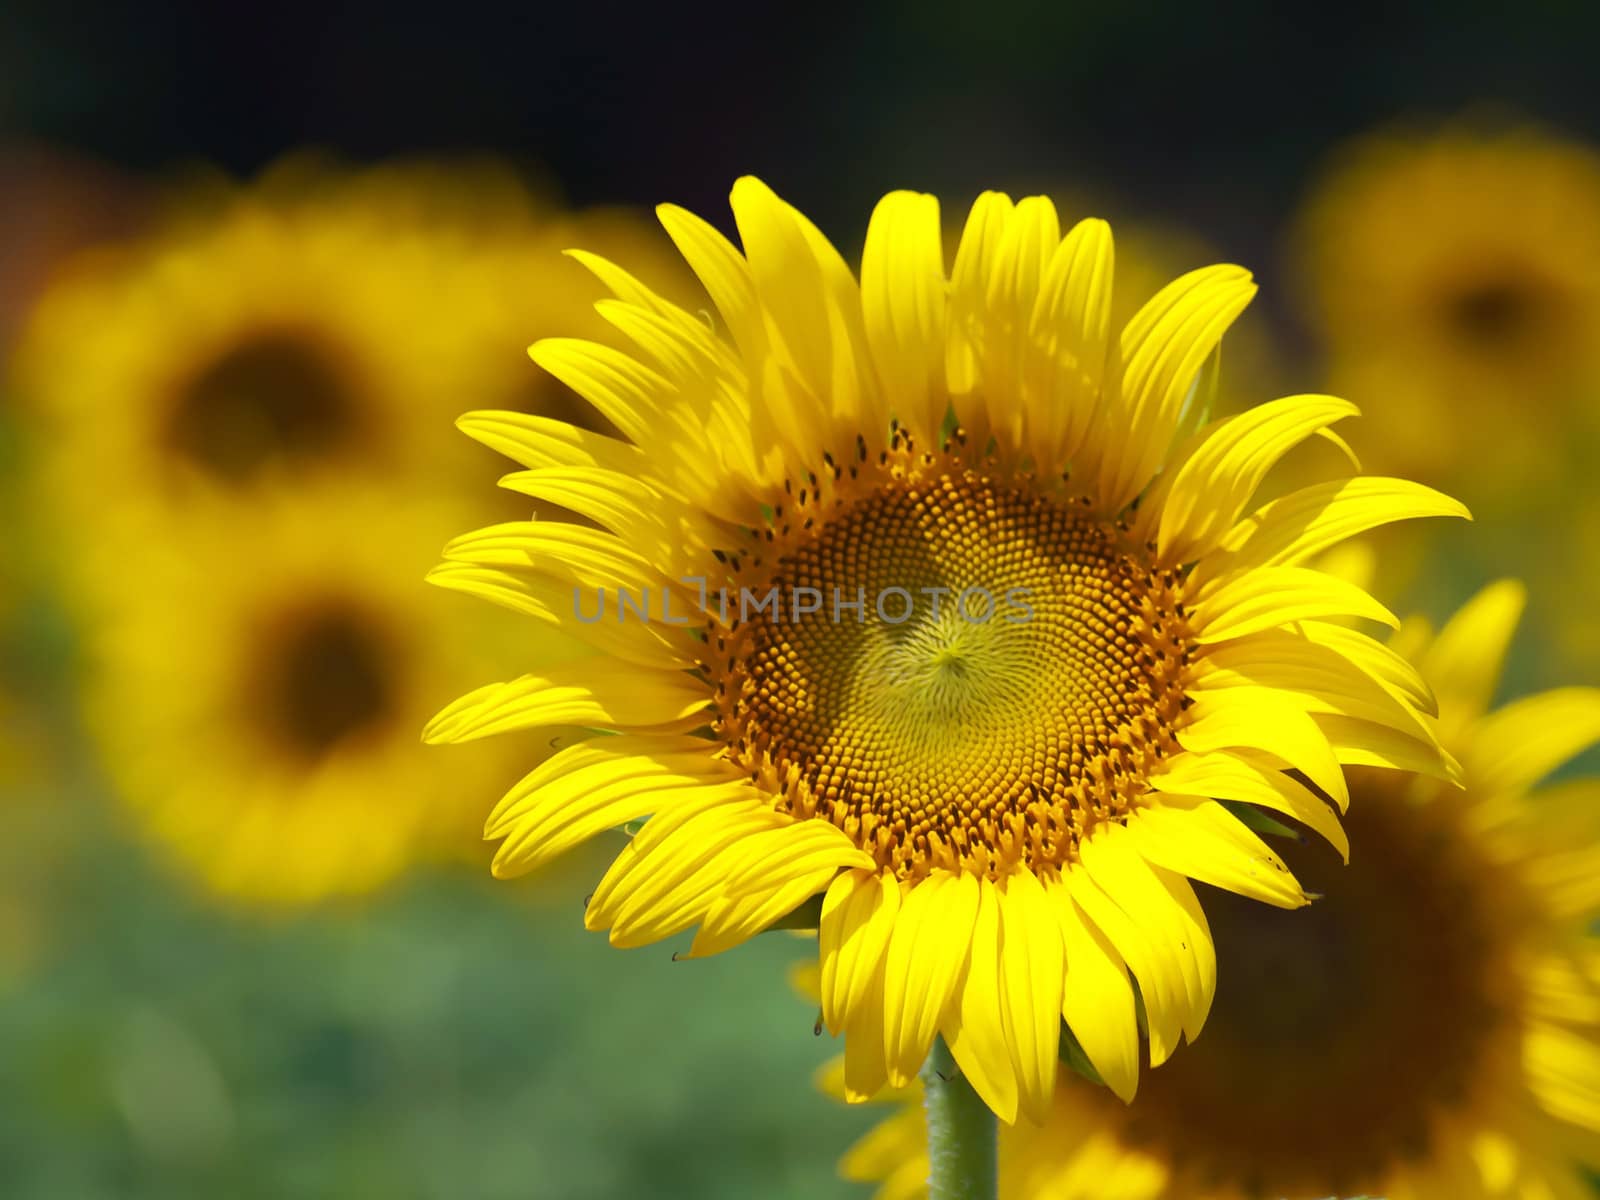 Sunflowers by Exsodus